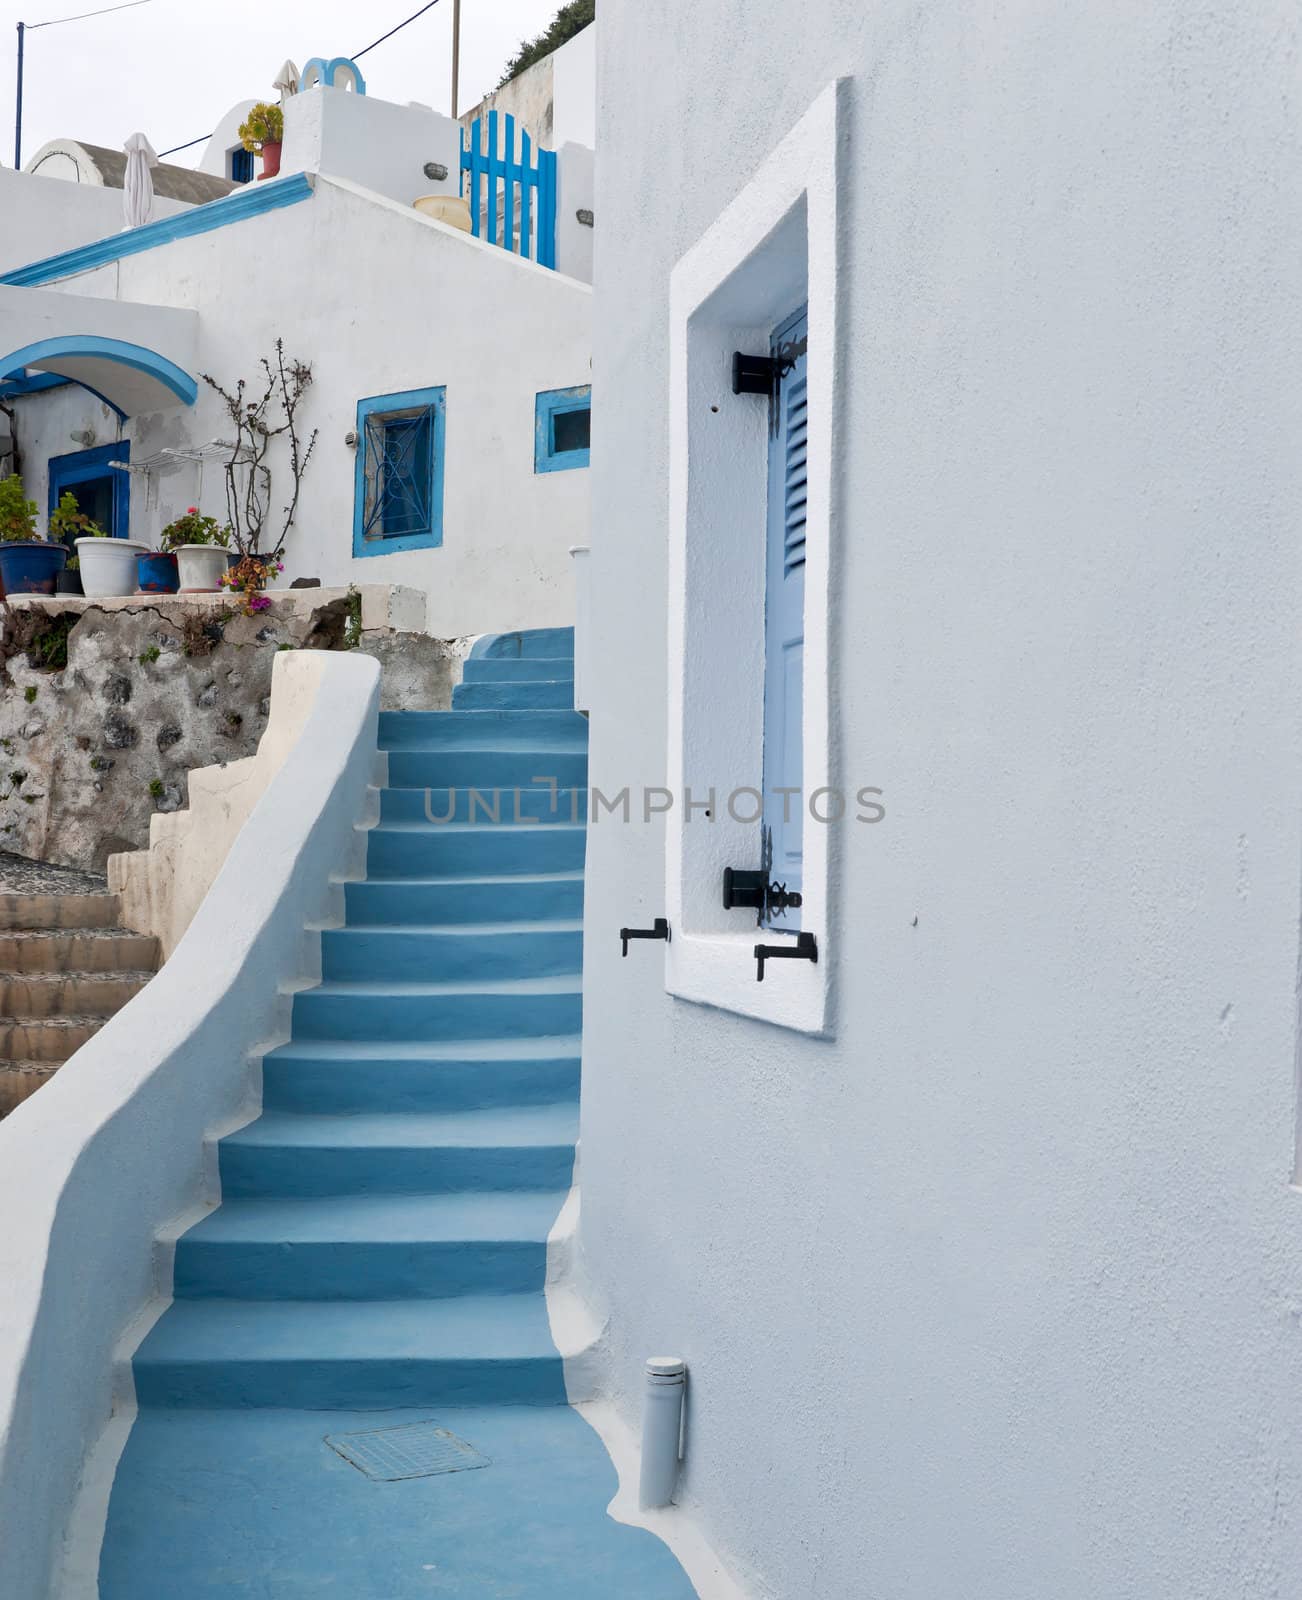 White buildings and blue staircase by mulden